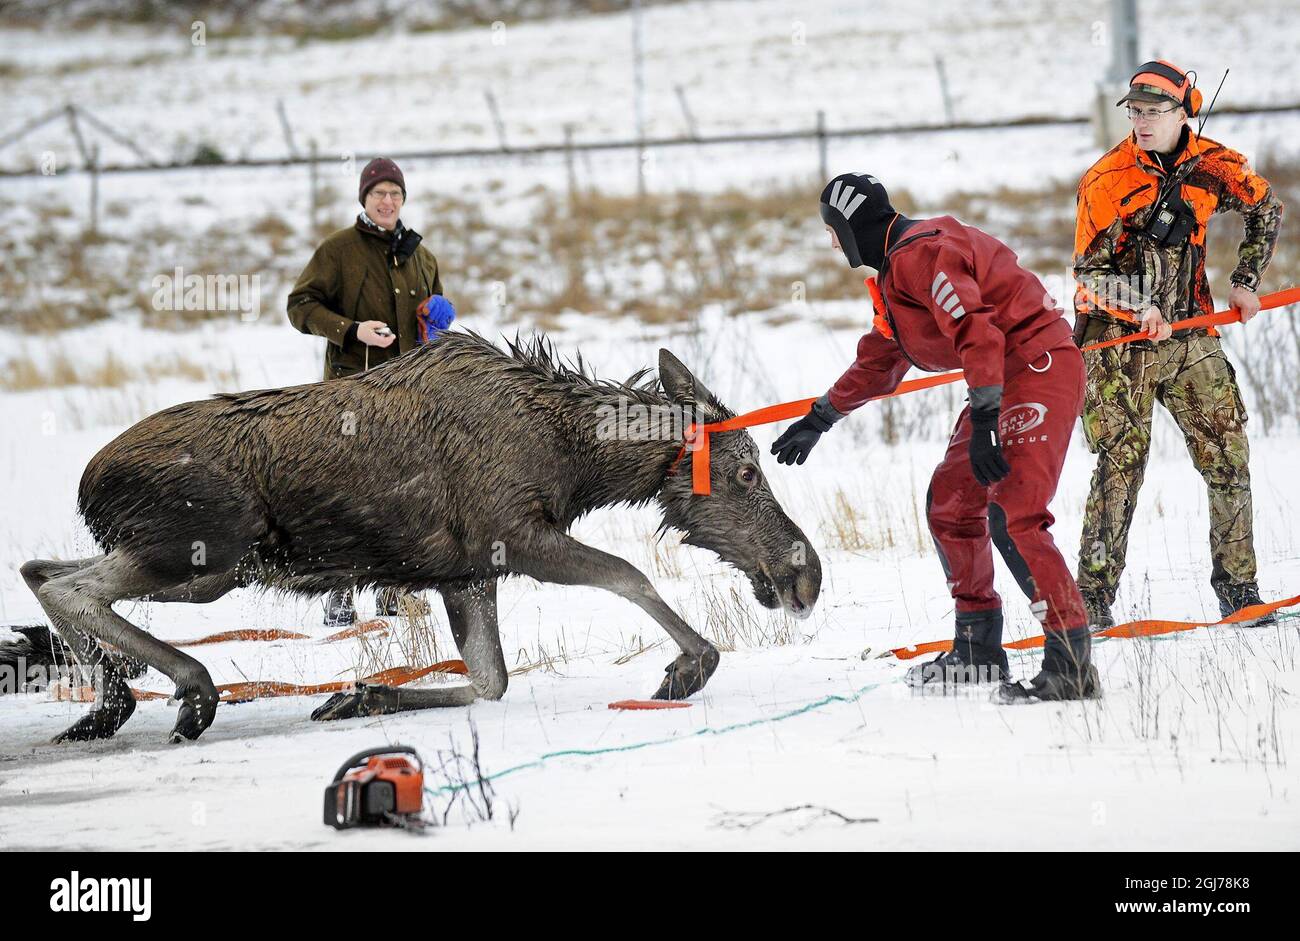 A moose is seen being saved from the icy waters near Kristinehamn, Sweden, January, 29, 2012. Two hunters saw a Moose with two calves walking on the ice of a lake. Suddenly the the ice broke under them leaving the animals helpless in the cold water. The Moose helped herself ashore while one of her calfs died. The two hunters managed two keep the remaining moose above the surface until the rescue service arrived to drag it to safety. The calf later reunited with its mother. Photo Peter Backer / Varmlands Folkblad / SCANPIX Code 70555 Stock Photo